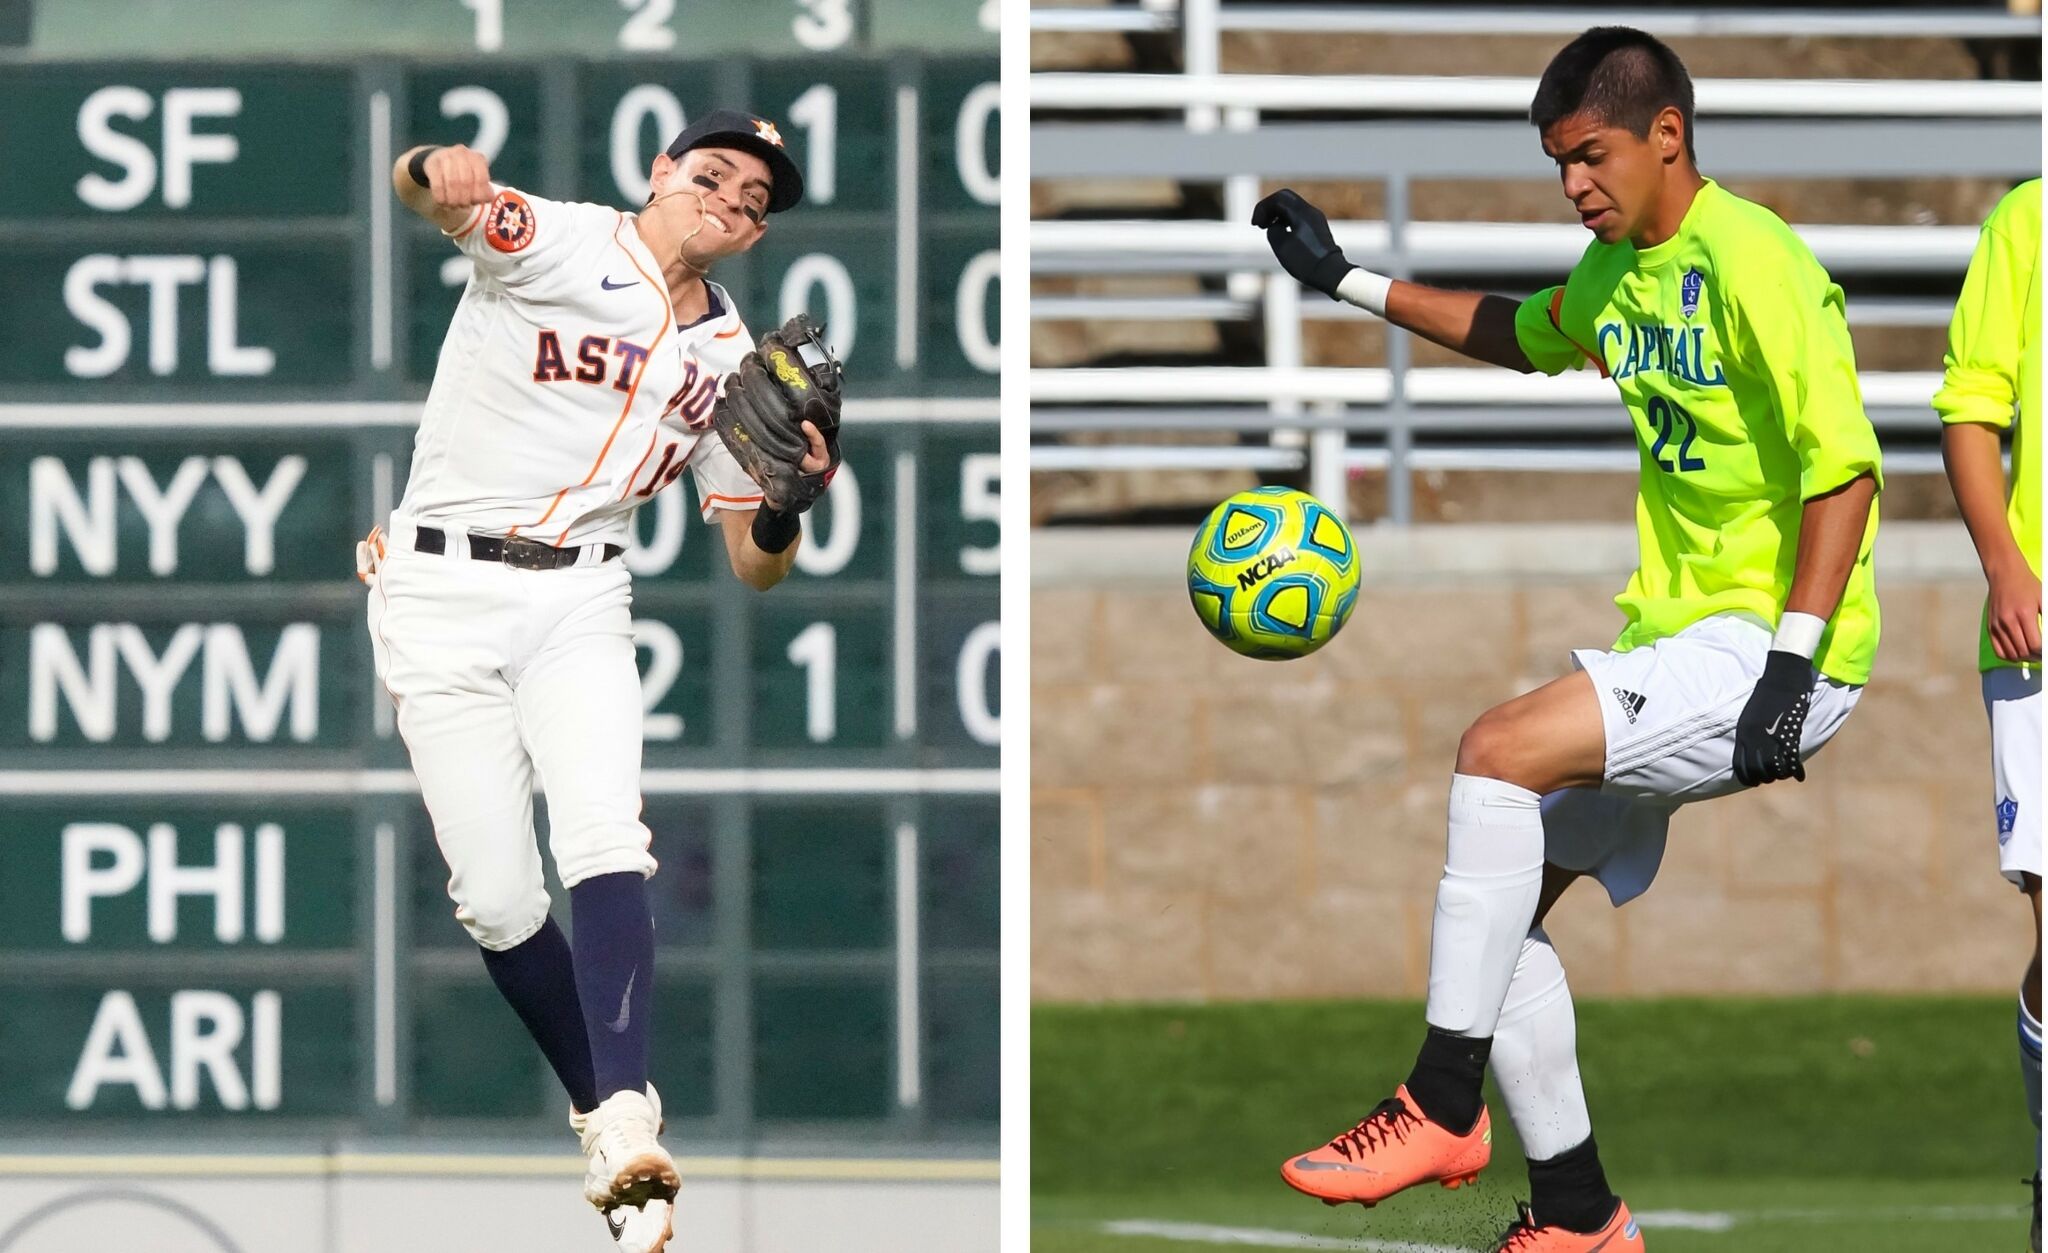 Mauricio Dubon Reminds Everyone Of Just Who the Astros Are — Baseball's  Most Joyful Player Is Impossible Not to Appreciate and He May Have the  Champs Back on Track